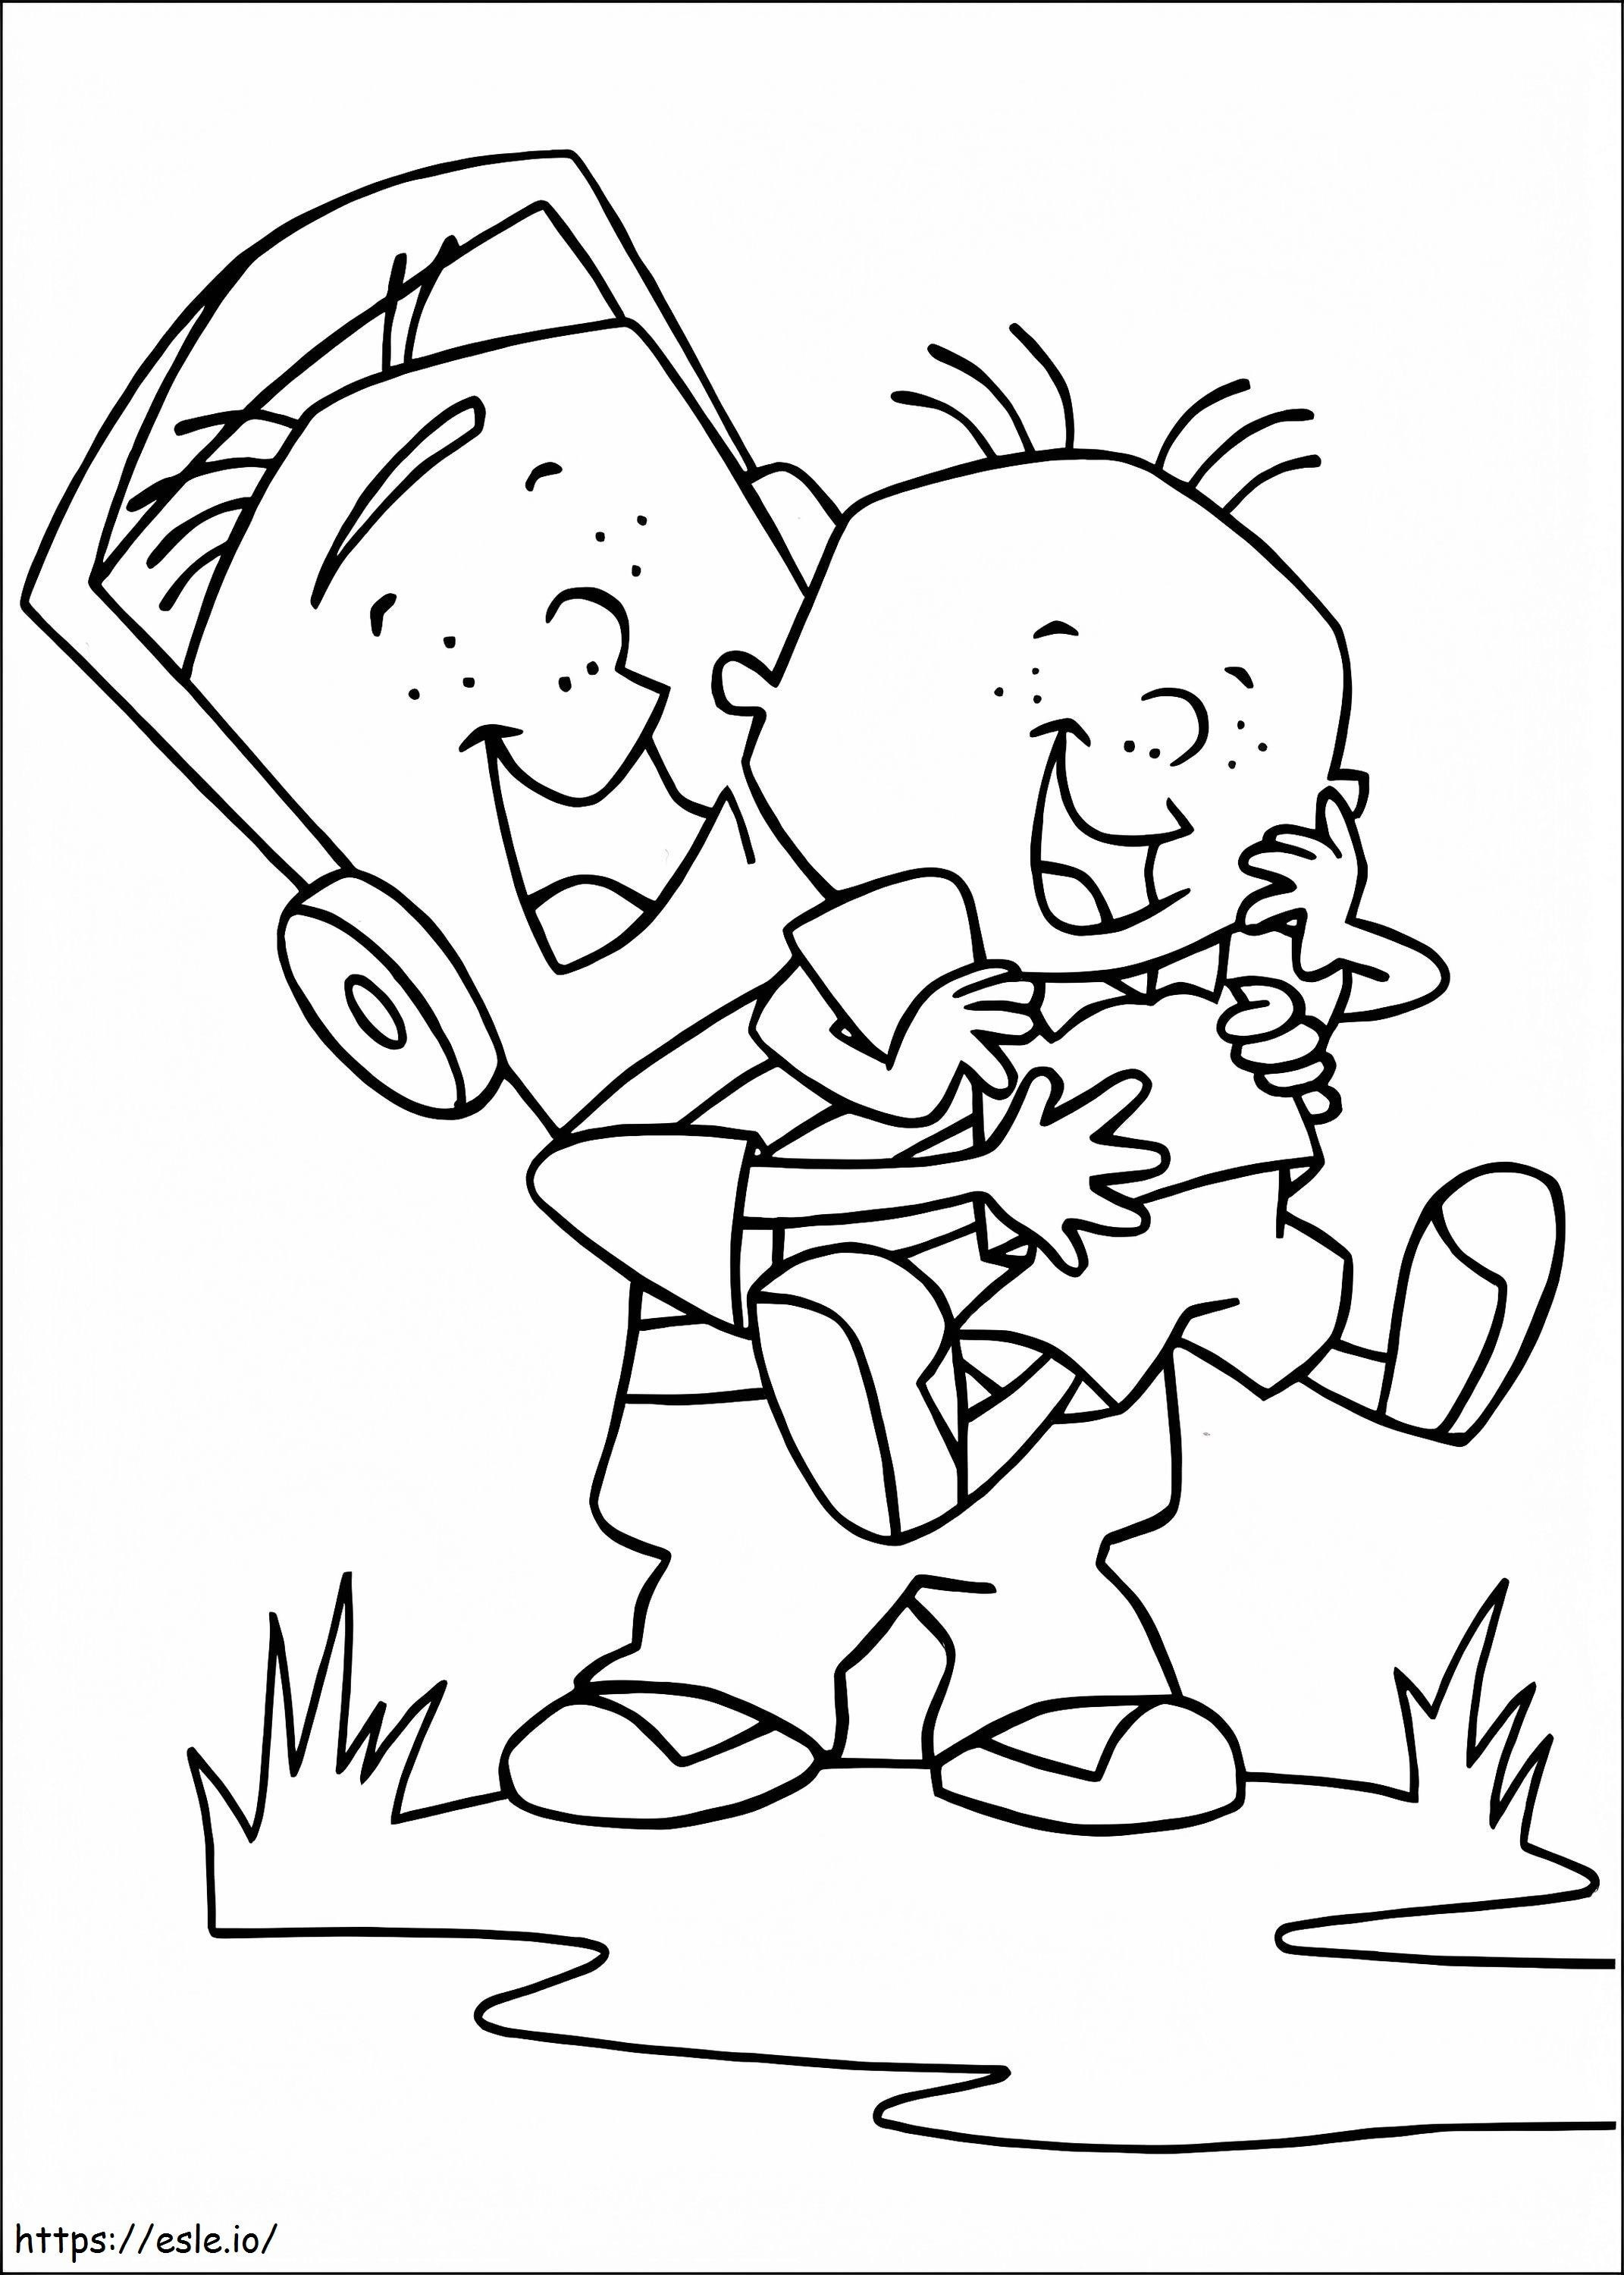 Stanley And Lionel Griff coloring page